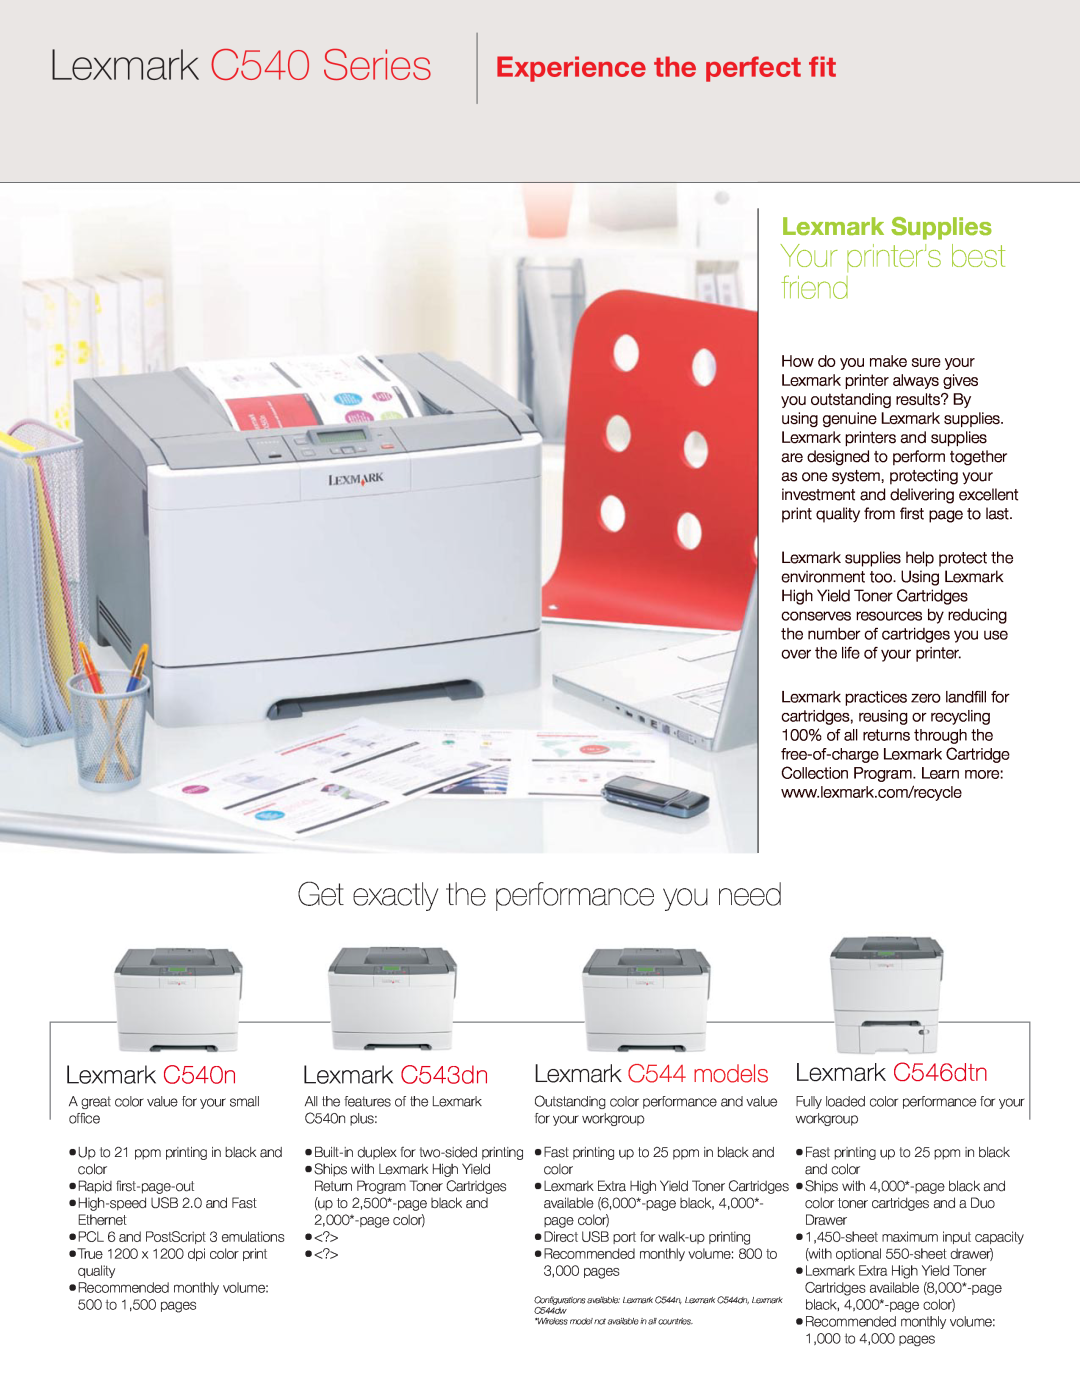 Lexmark 546dtn Lexmark C540 Series, Get exactly the performance you need, Your printer’s best friend, Lexmark Supplies 